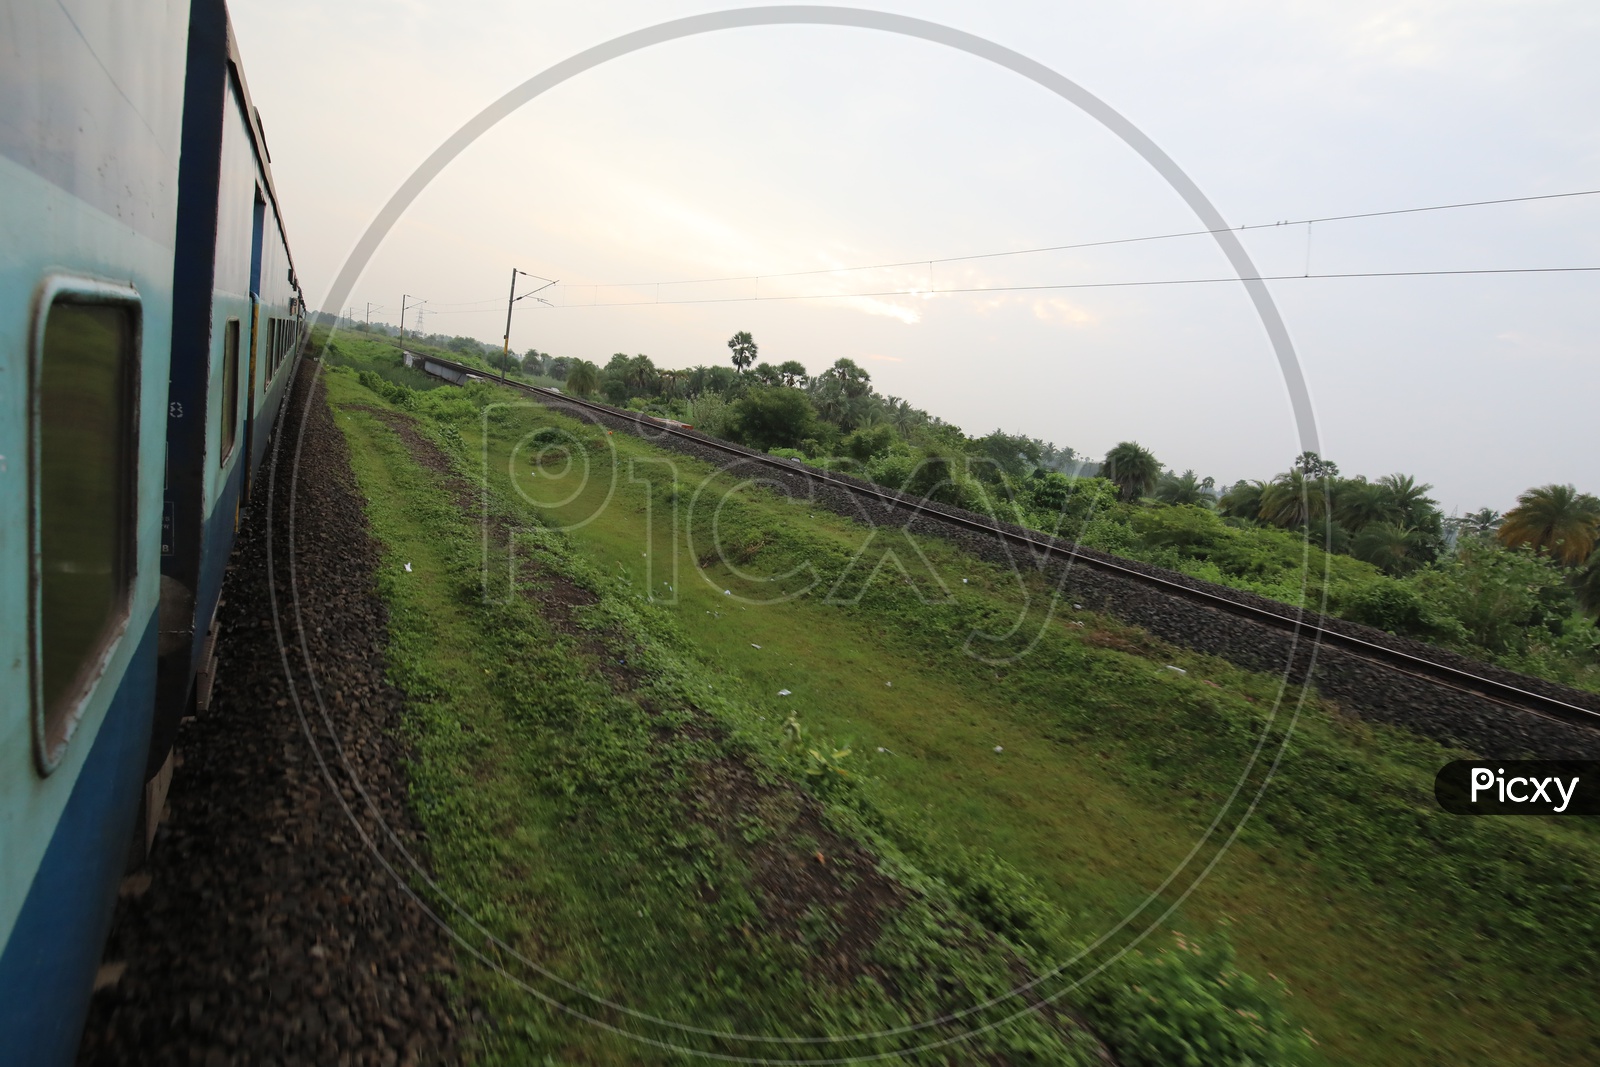 Indian Railways Train Running On Track Lines With Electric Poles and Wire Lines